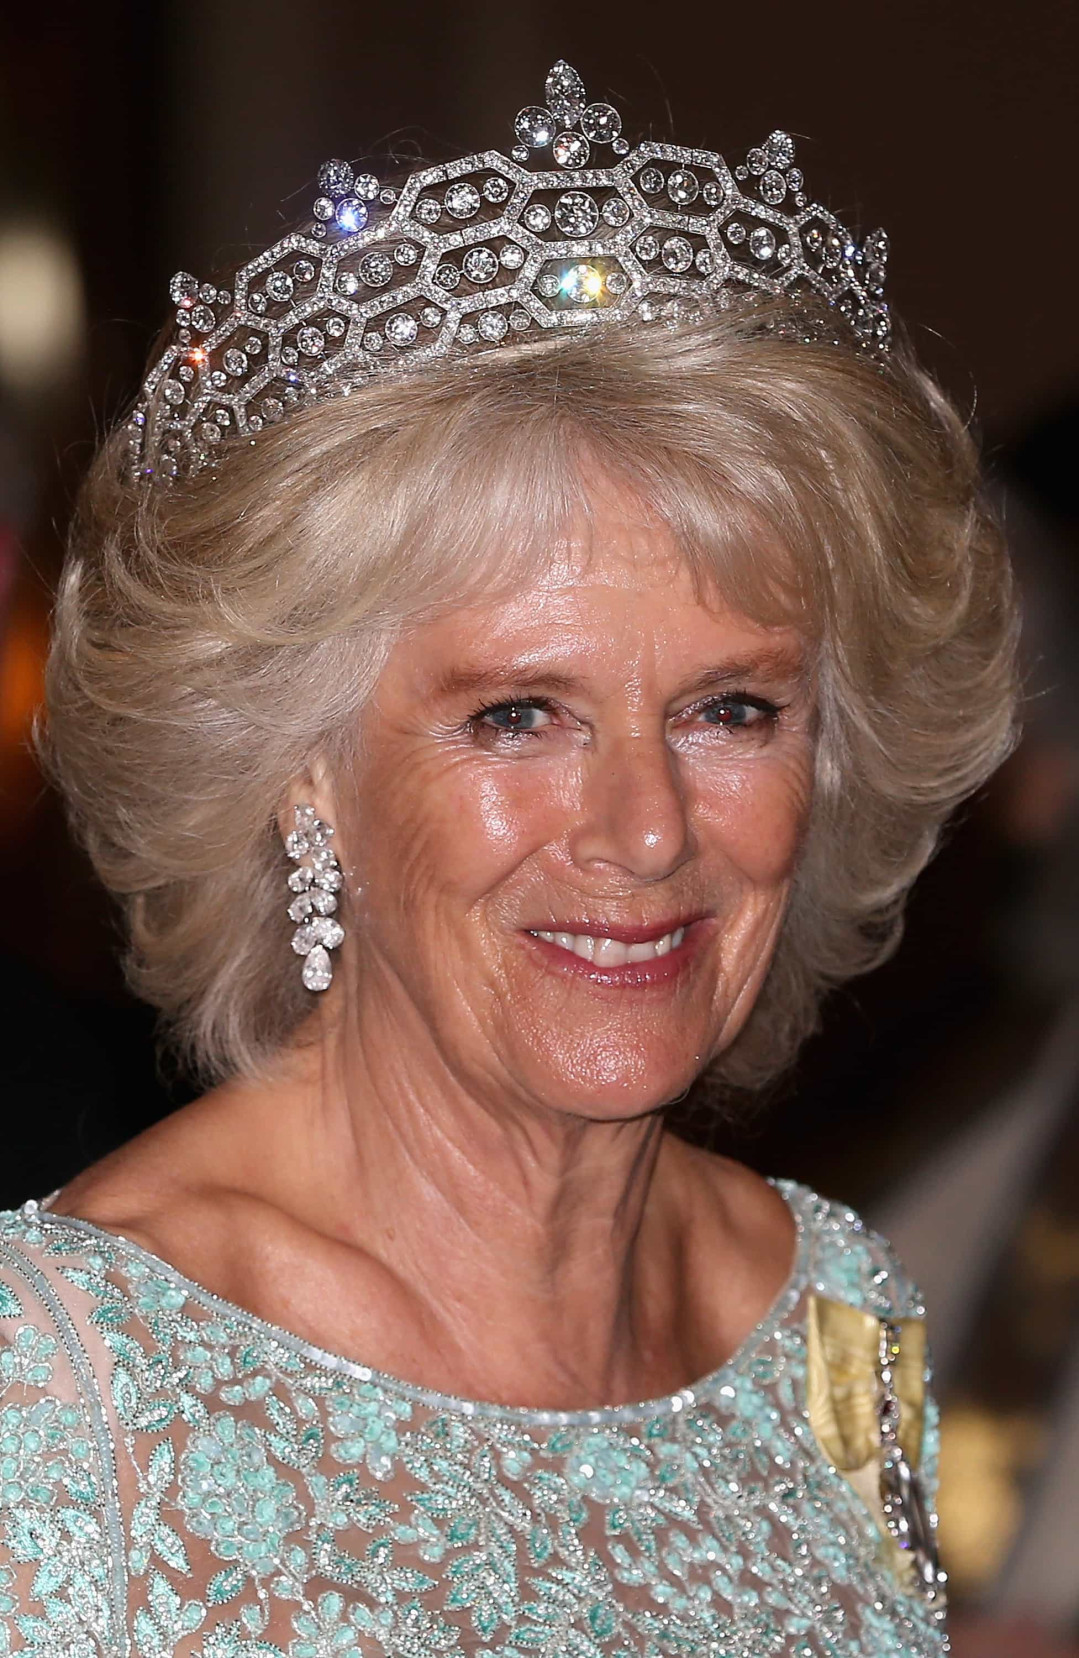 Towering tiaras and more: Extravagant jewelry owned by British royals